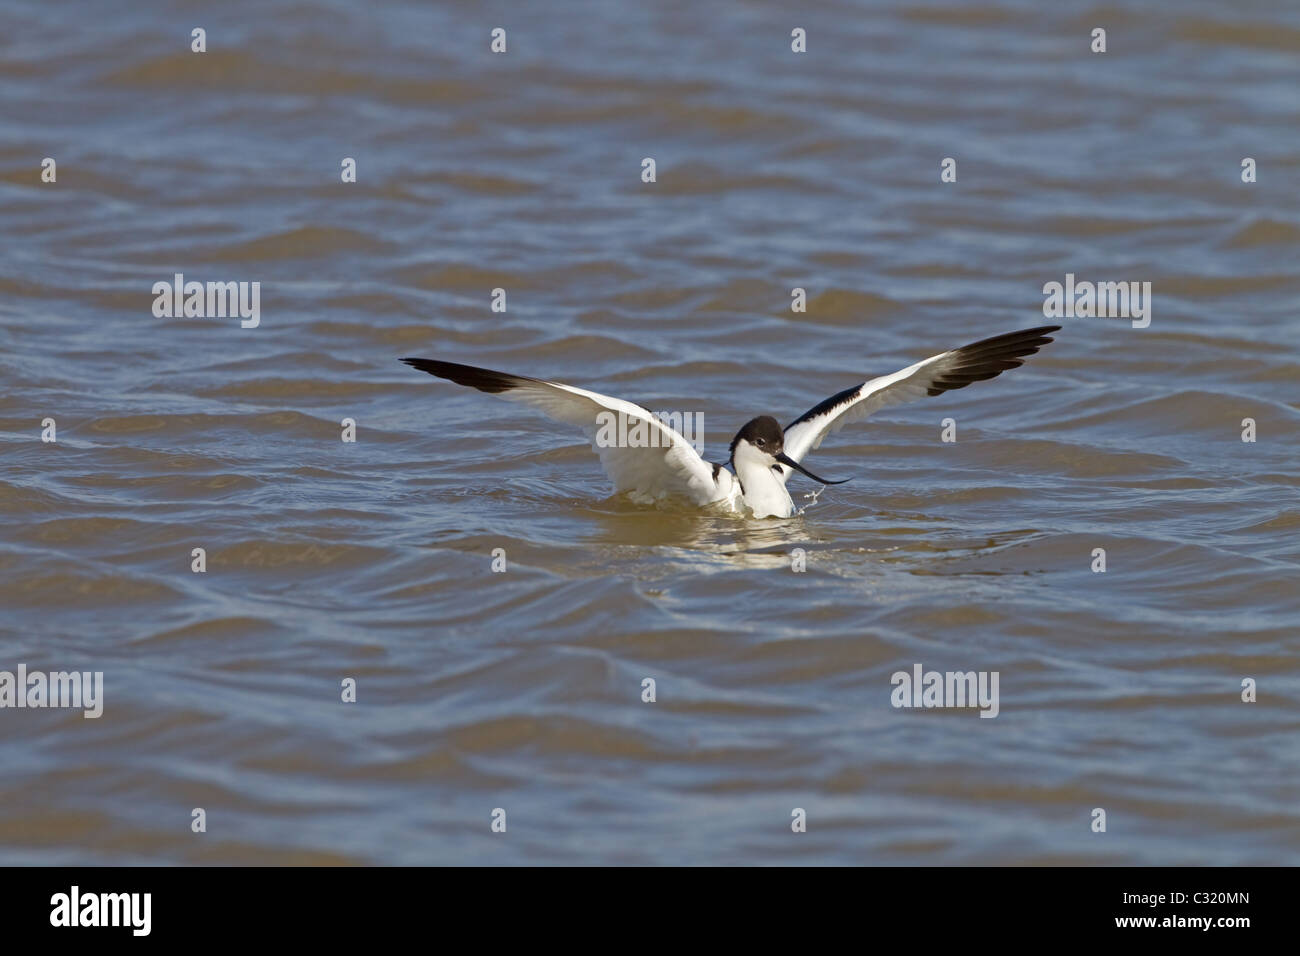 Avocet Recurvirostra avocetta about to land in shallow water Stock Photo